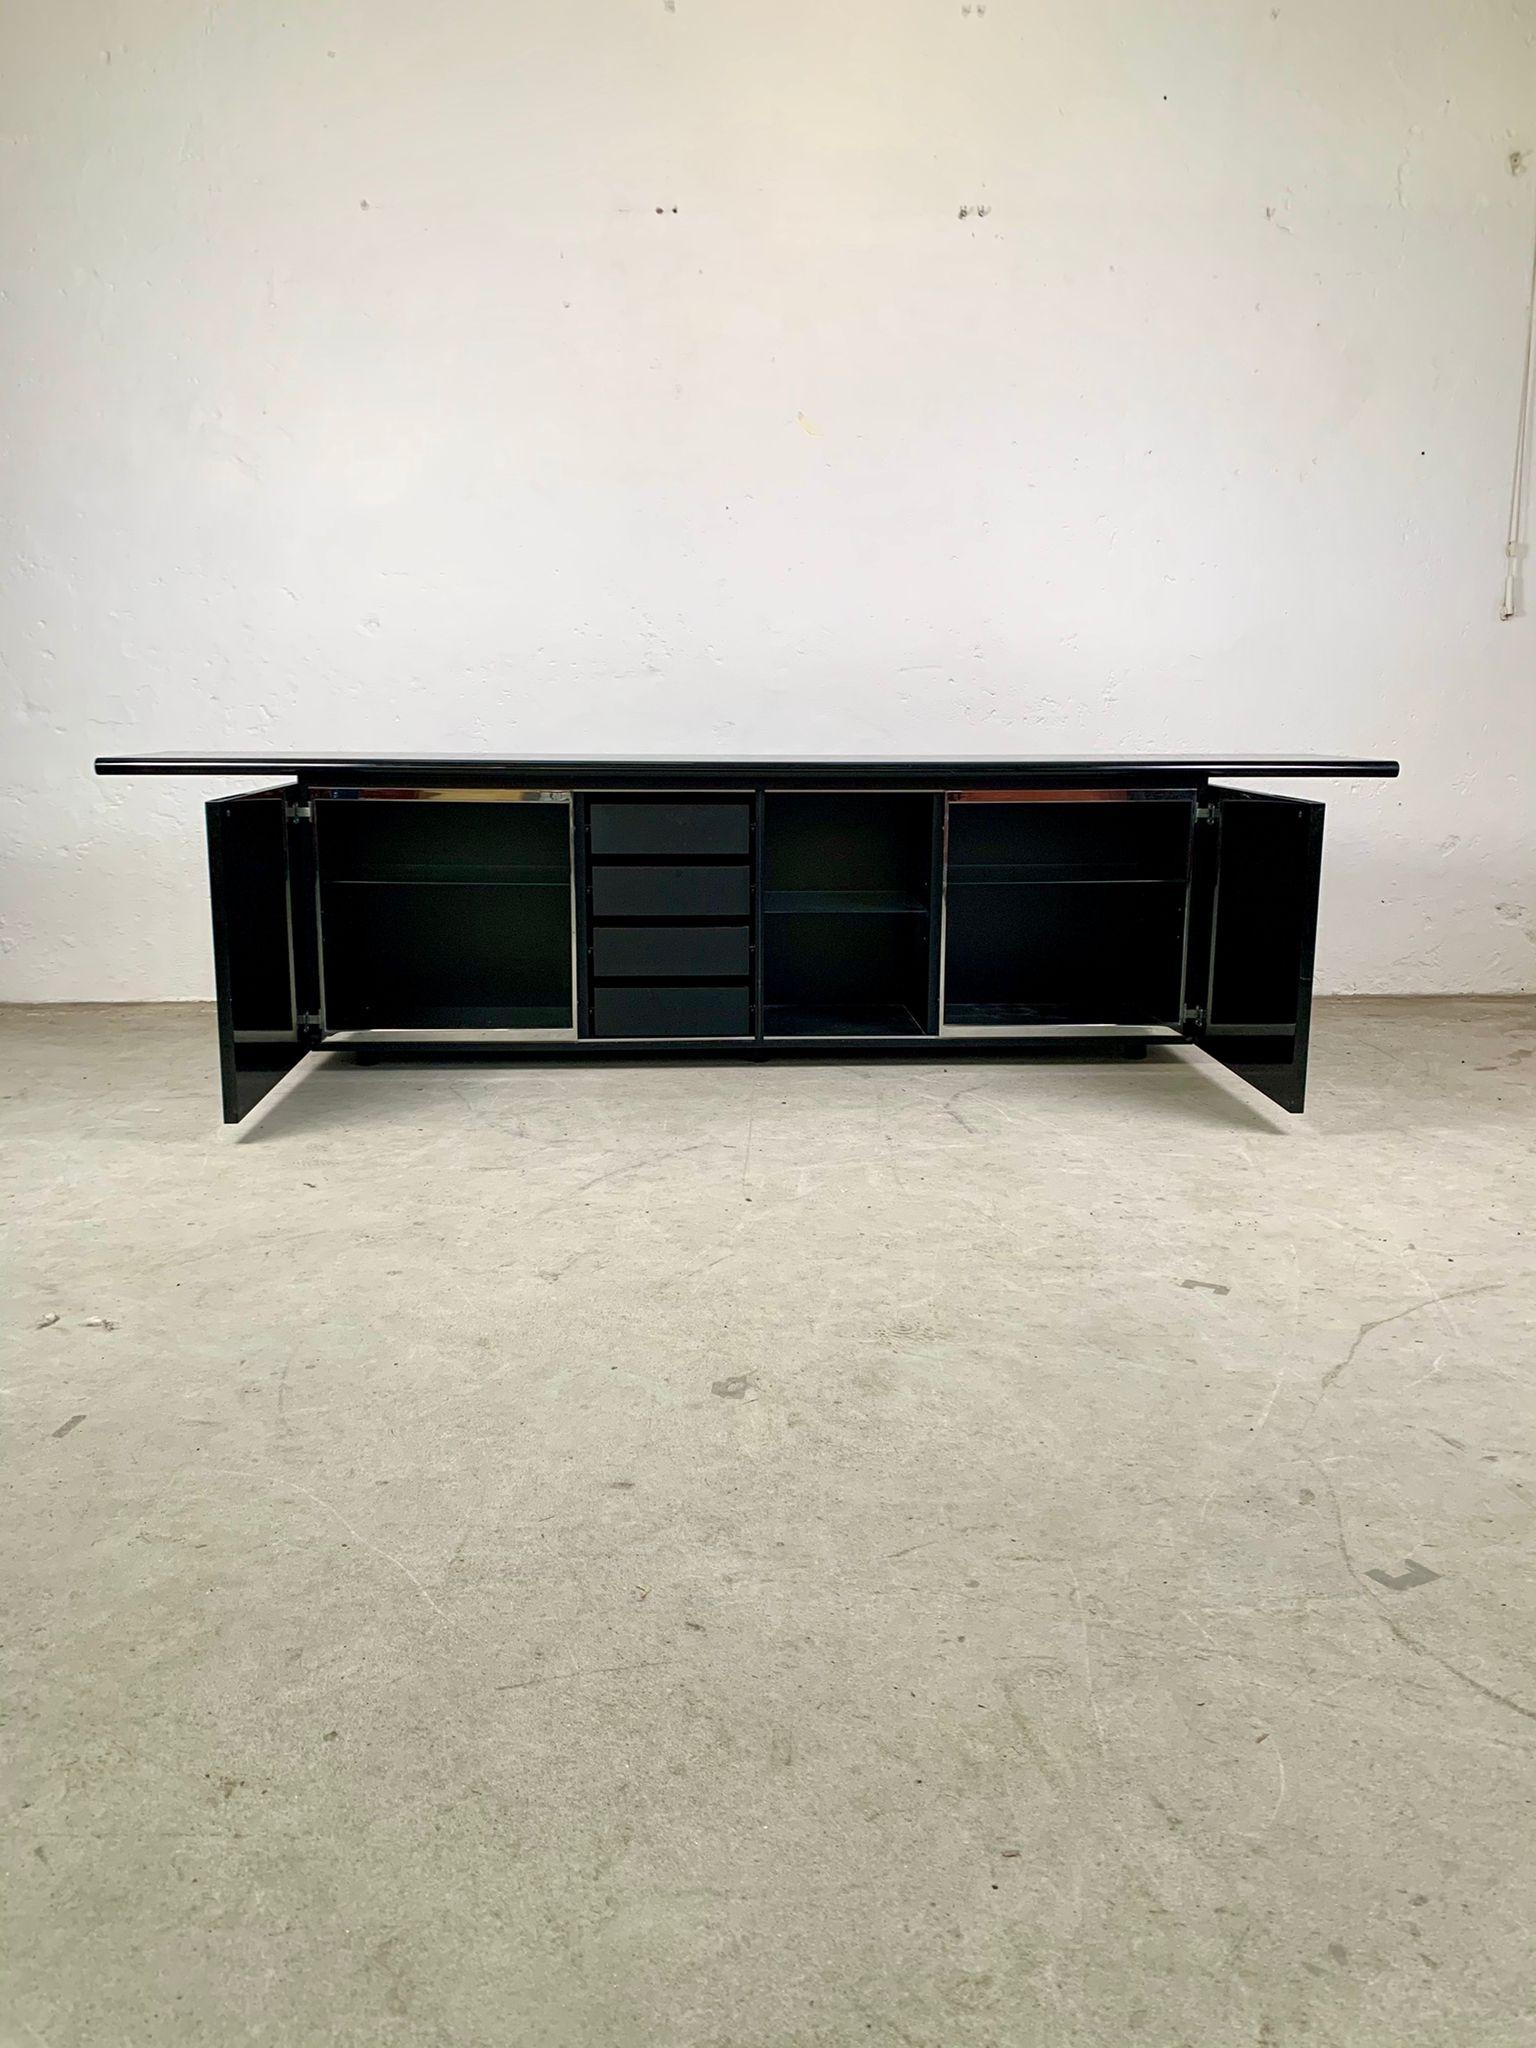 Giotto Stoppino and Ludovico Acerbis, Black lacquered two-door storage sideboard, 1977

Black lacquered two-door storage sideboard, there are drawers and shelves inside. 
Project winner of the compasso d'oro in 1979. 